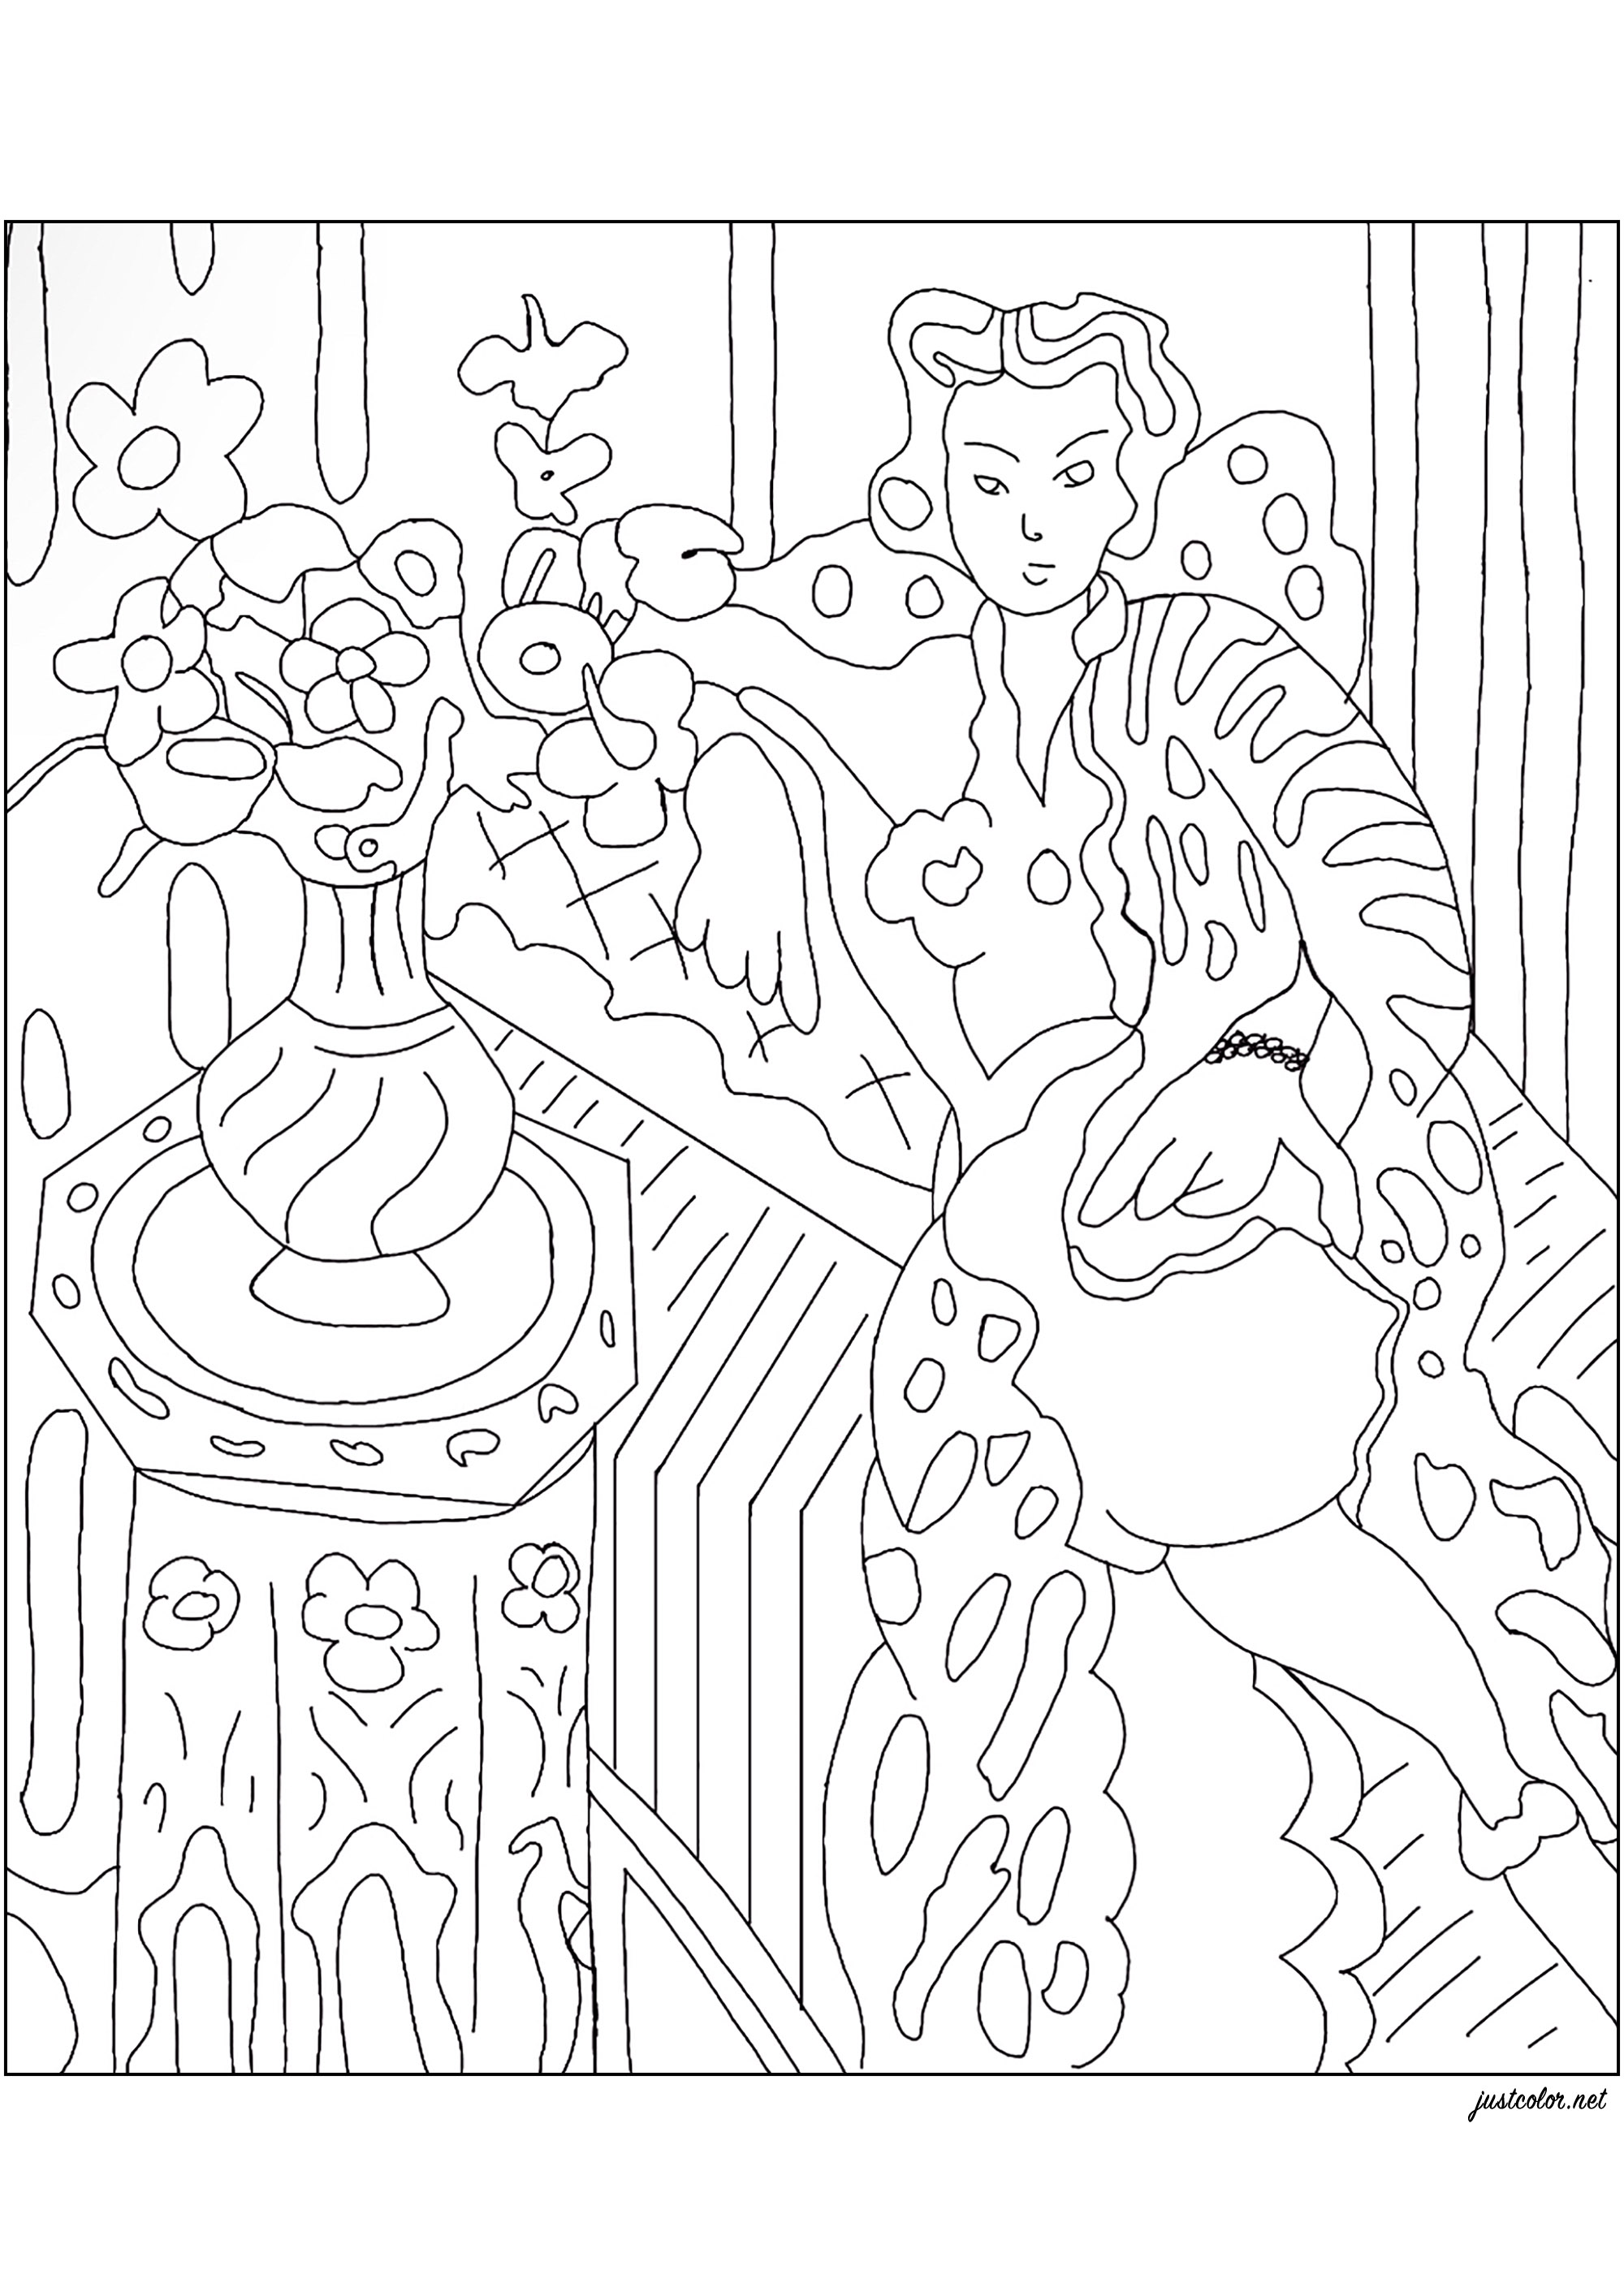 Coloring from 'Odalisque a la robe persane jaune' (1937) by Henri Matisse. In this painting, Matisse uses his familiar model, Hélène Galtzine, to depict a figure dressed in a yellow Persian dress, surrounded by the painter's personal objects, creating a dreamlike interior. Inspired by his travels in the Maghreb, Matisse revisited the odalisque motif, inherited from Orientalist nudes, modernizing them and transforming them into archetypes of the modern woman between the wars, Artist : Jade F